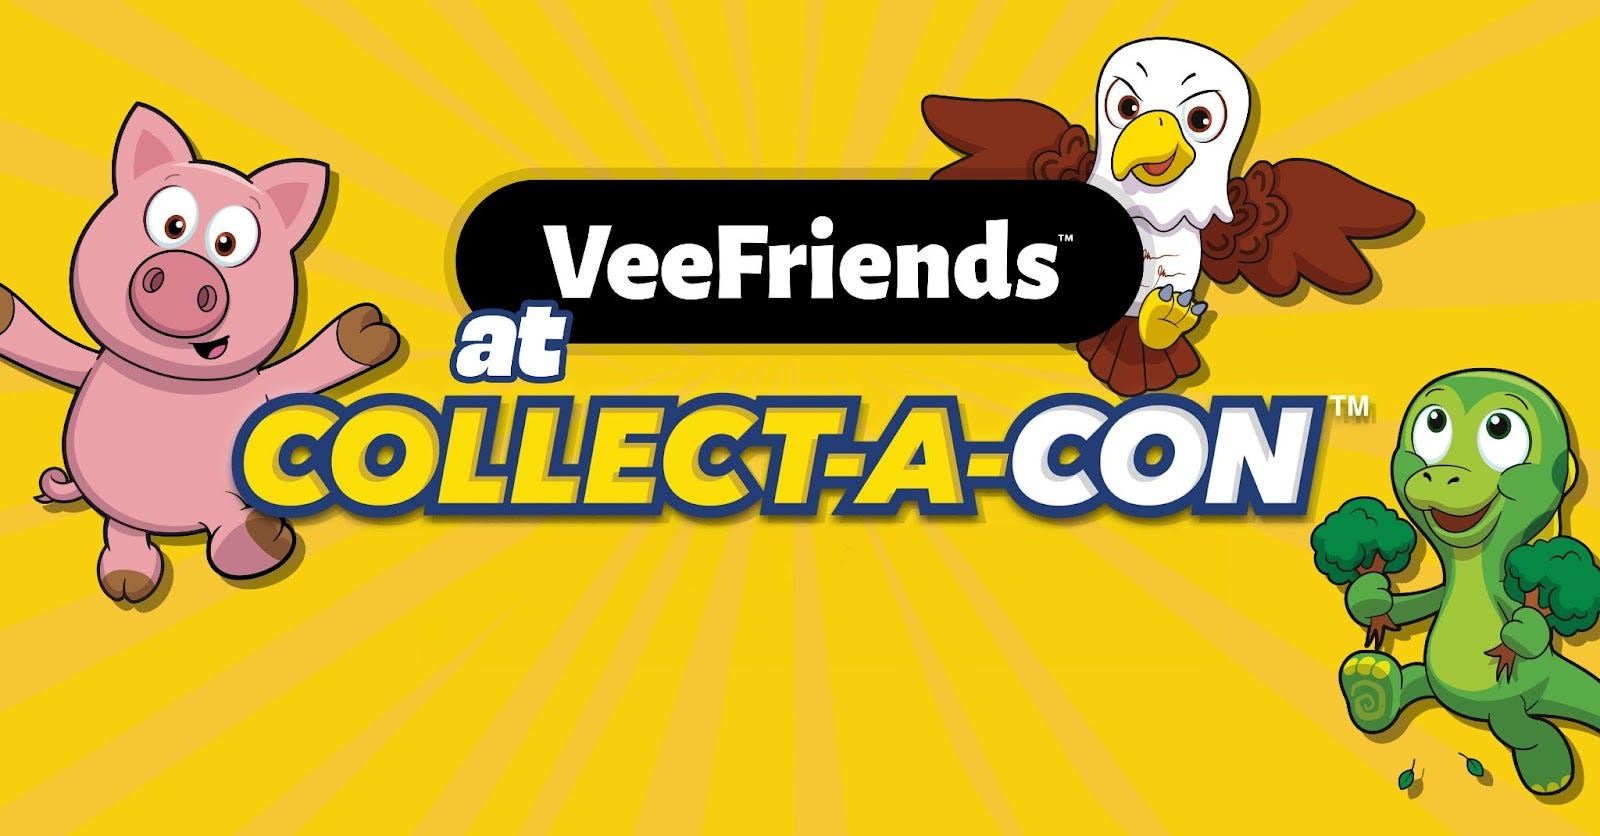 VeeFriends Takes On Collect-A-Con, First Stop Houston in Early April!